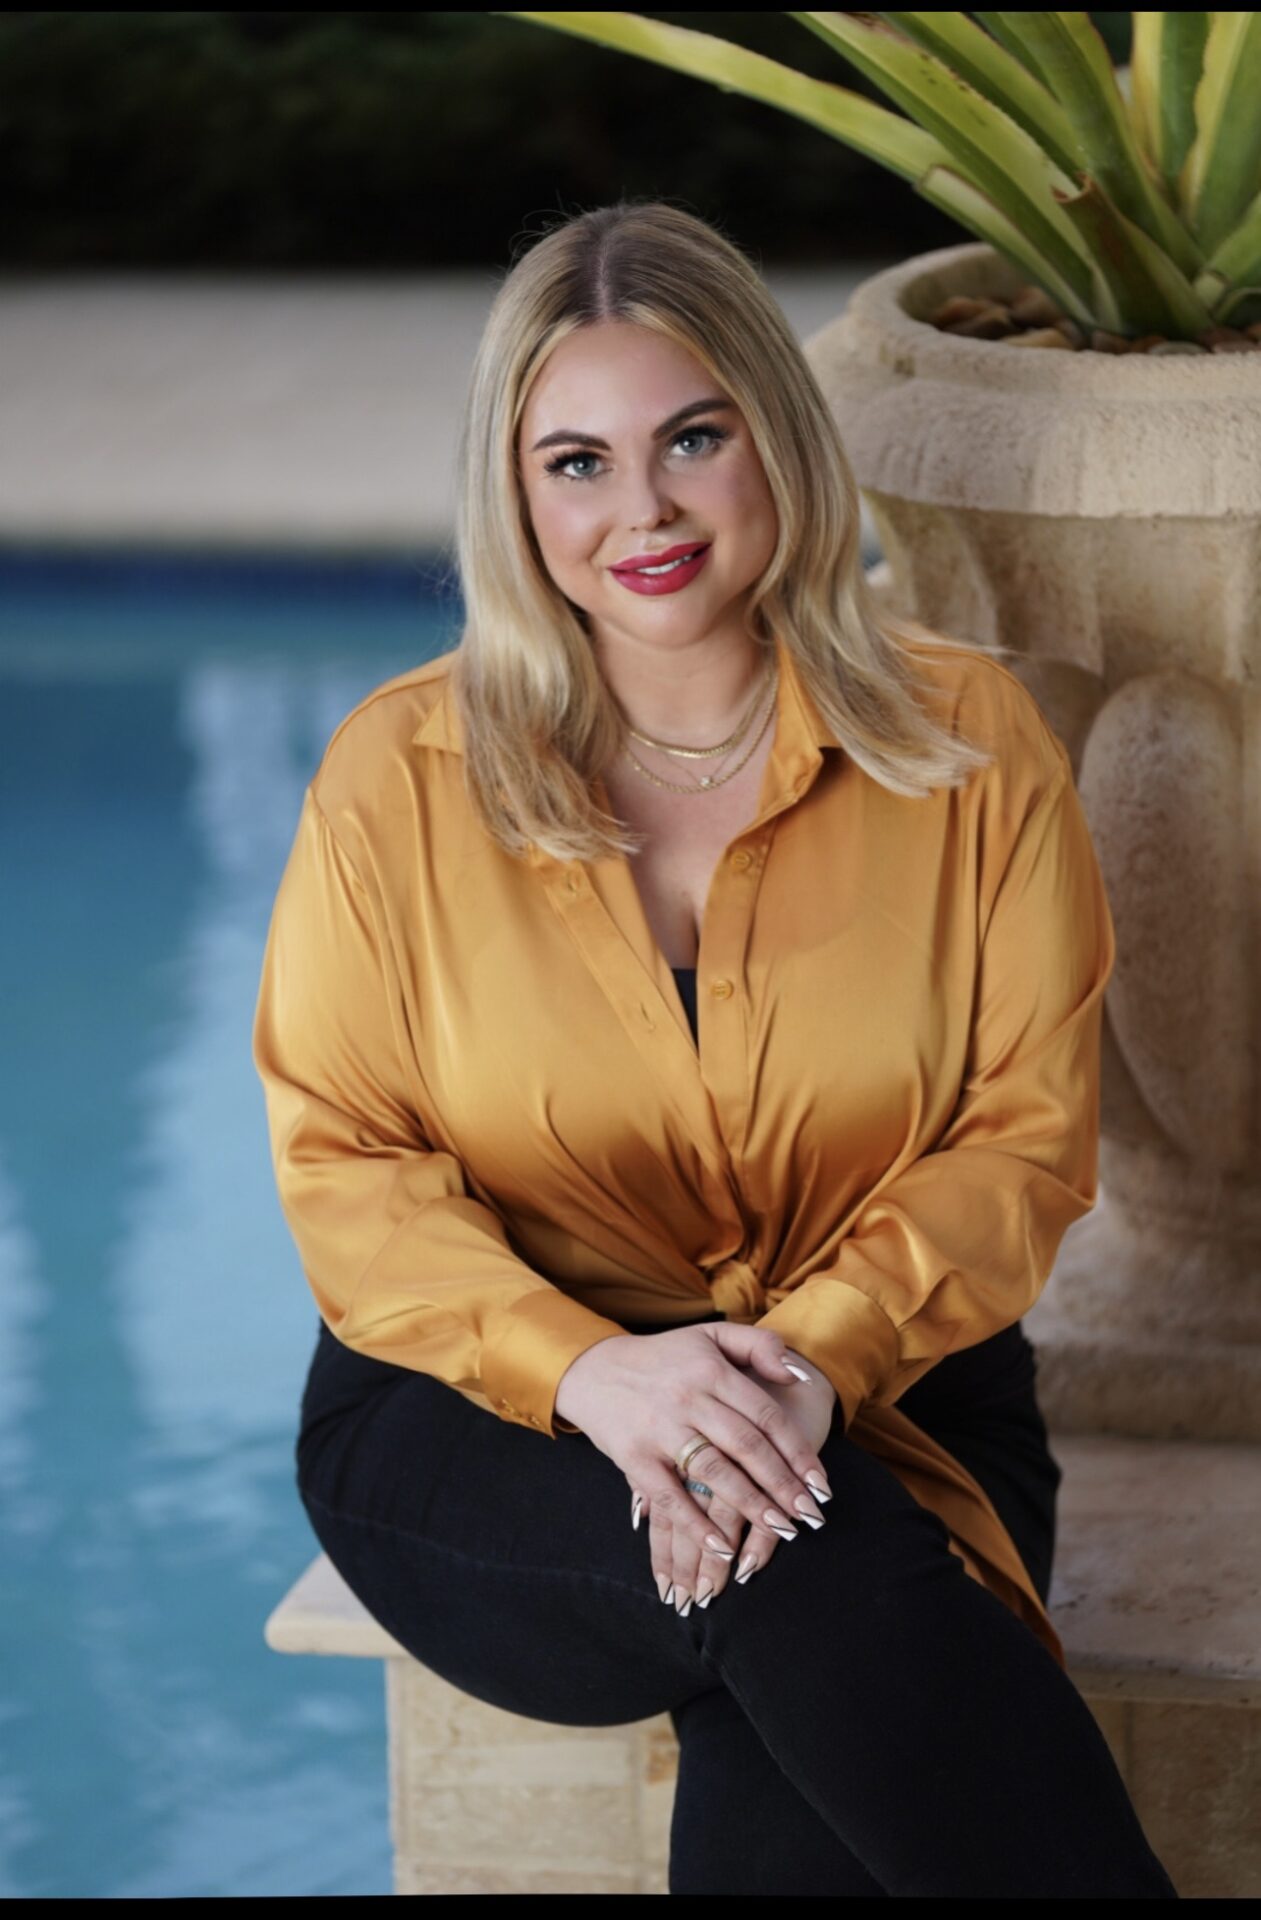 A woman sitting in front of a pool wearing an orange shirt.